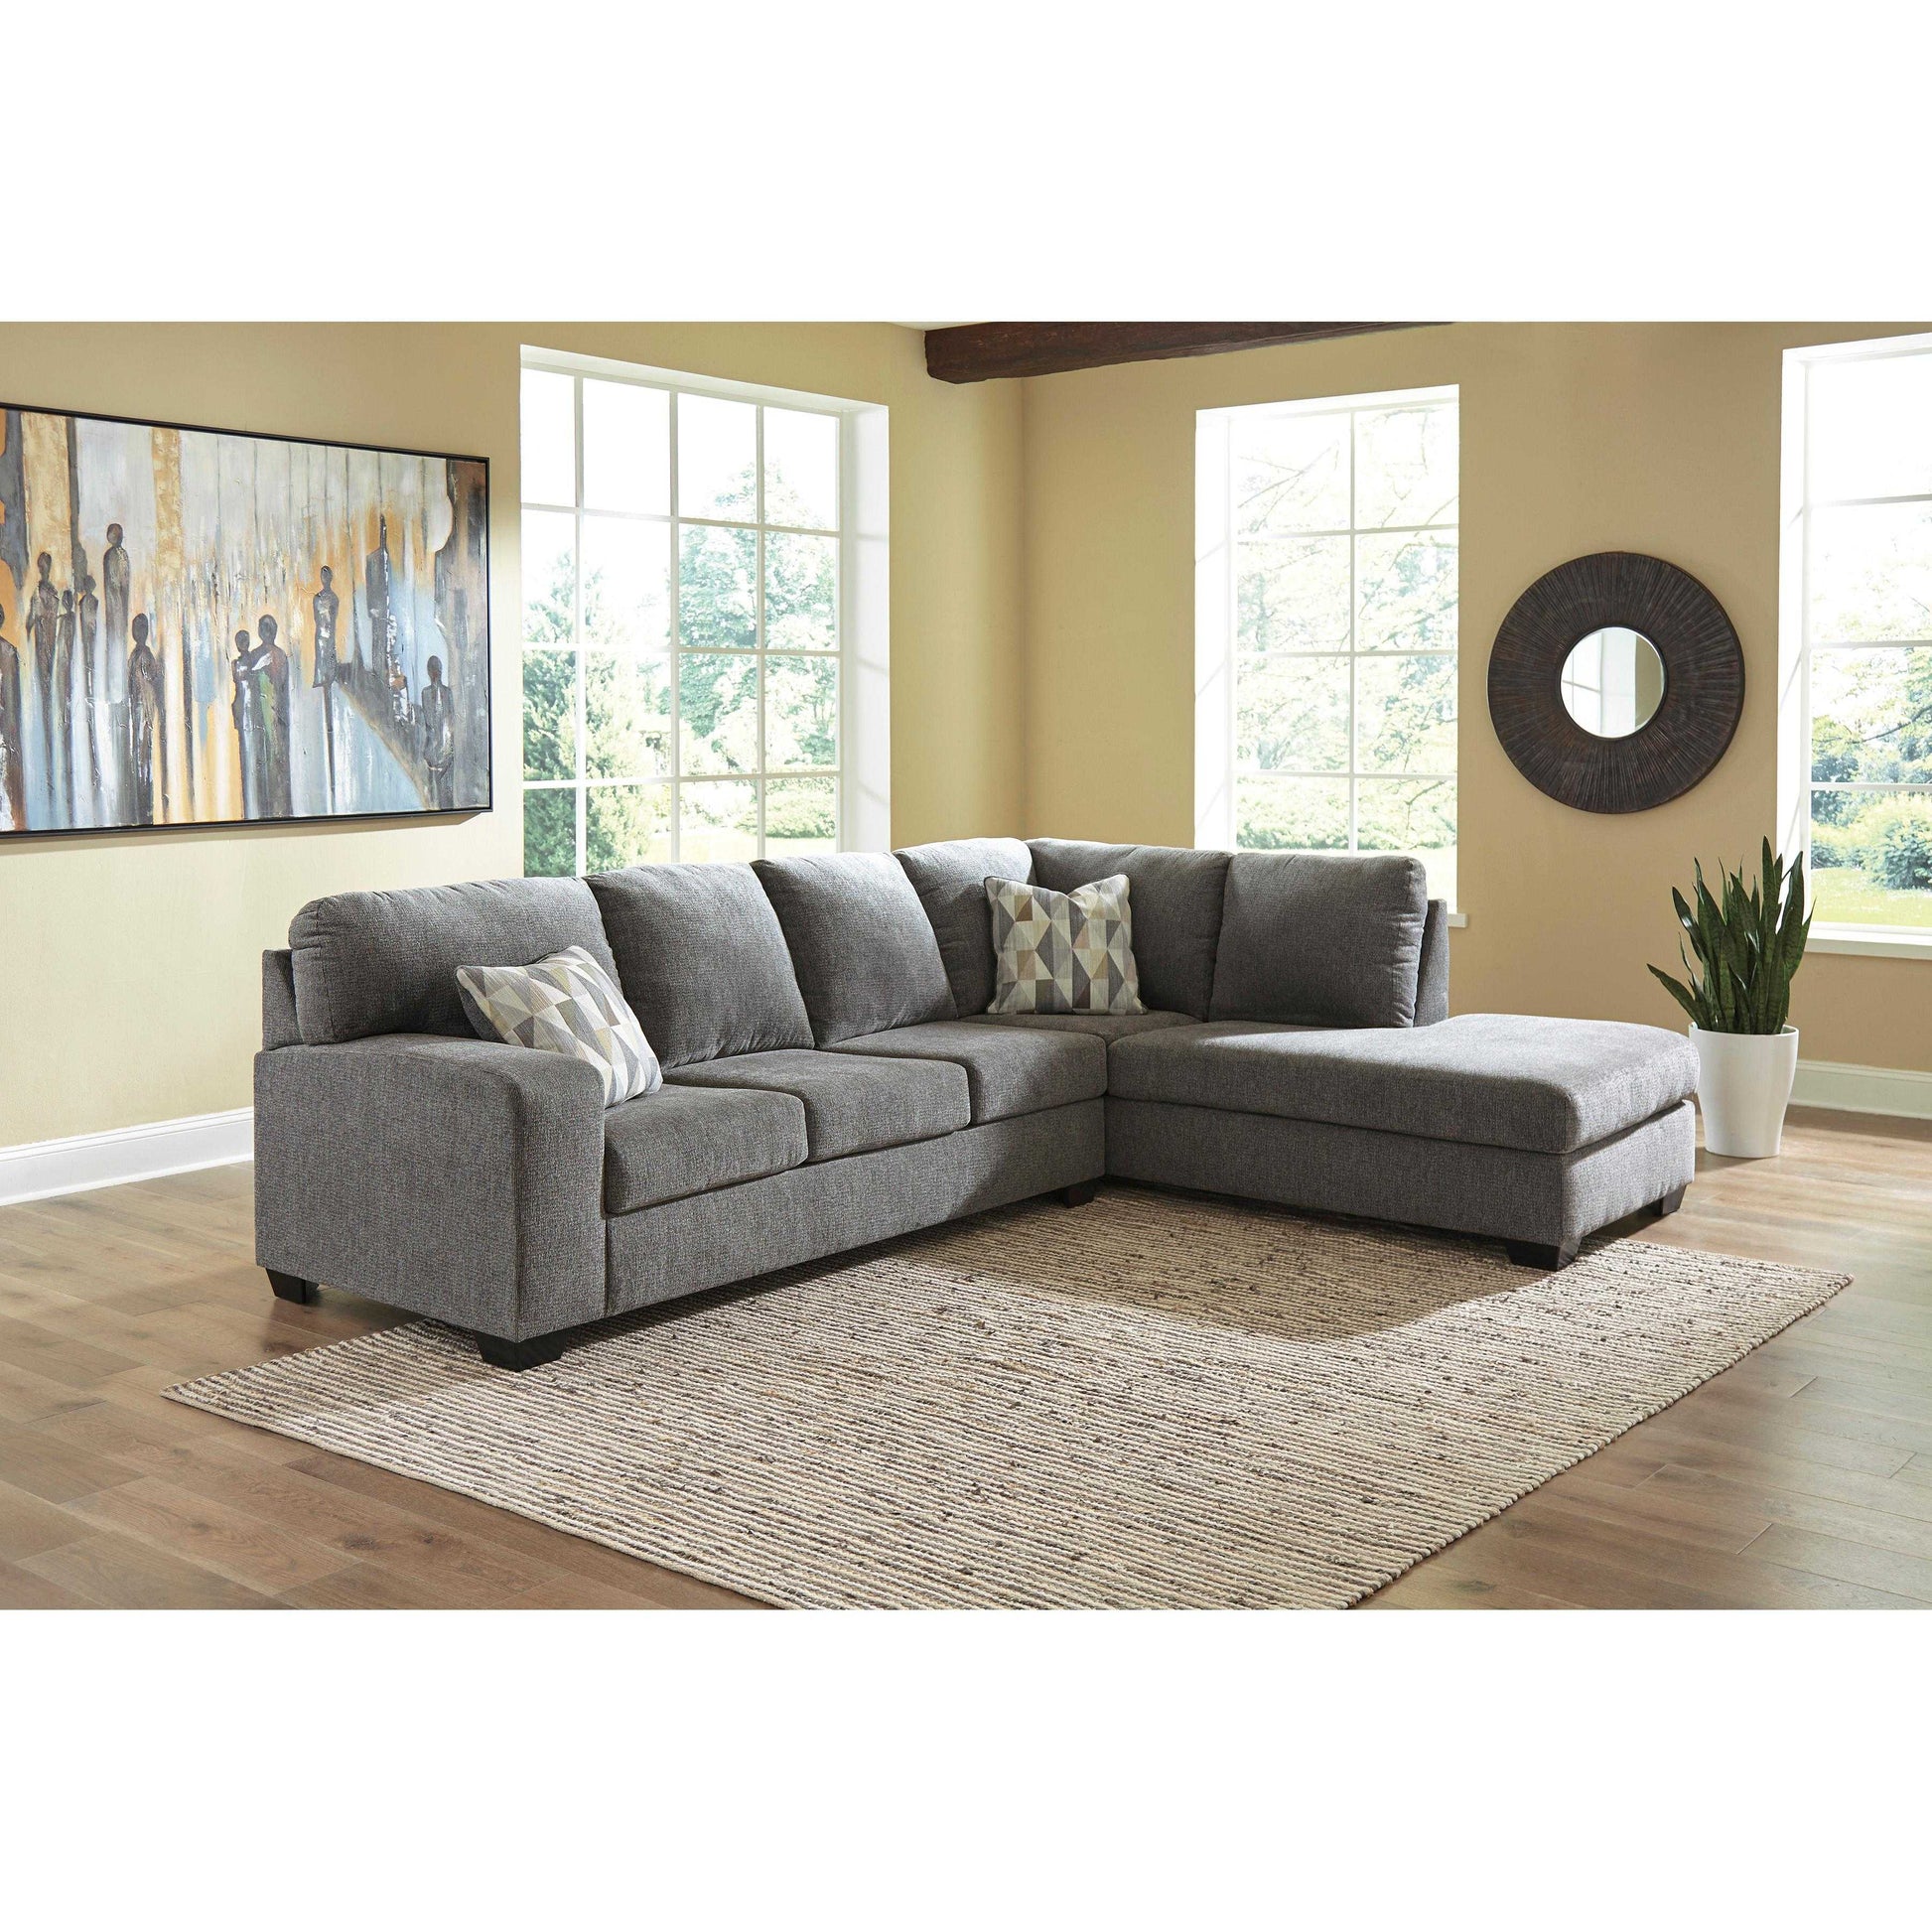 Benchcraft Dalhart Fabric 2 pc Sectional 8570366/8570317